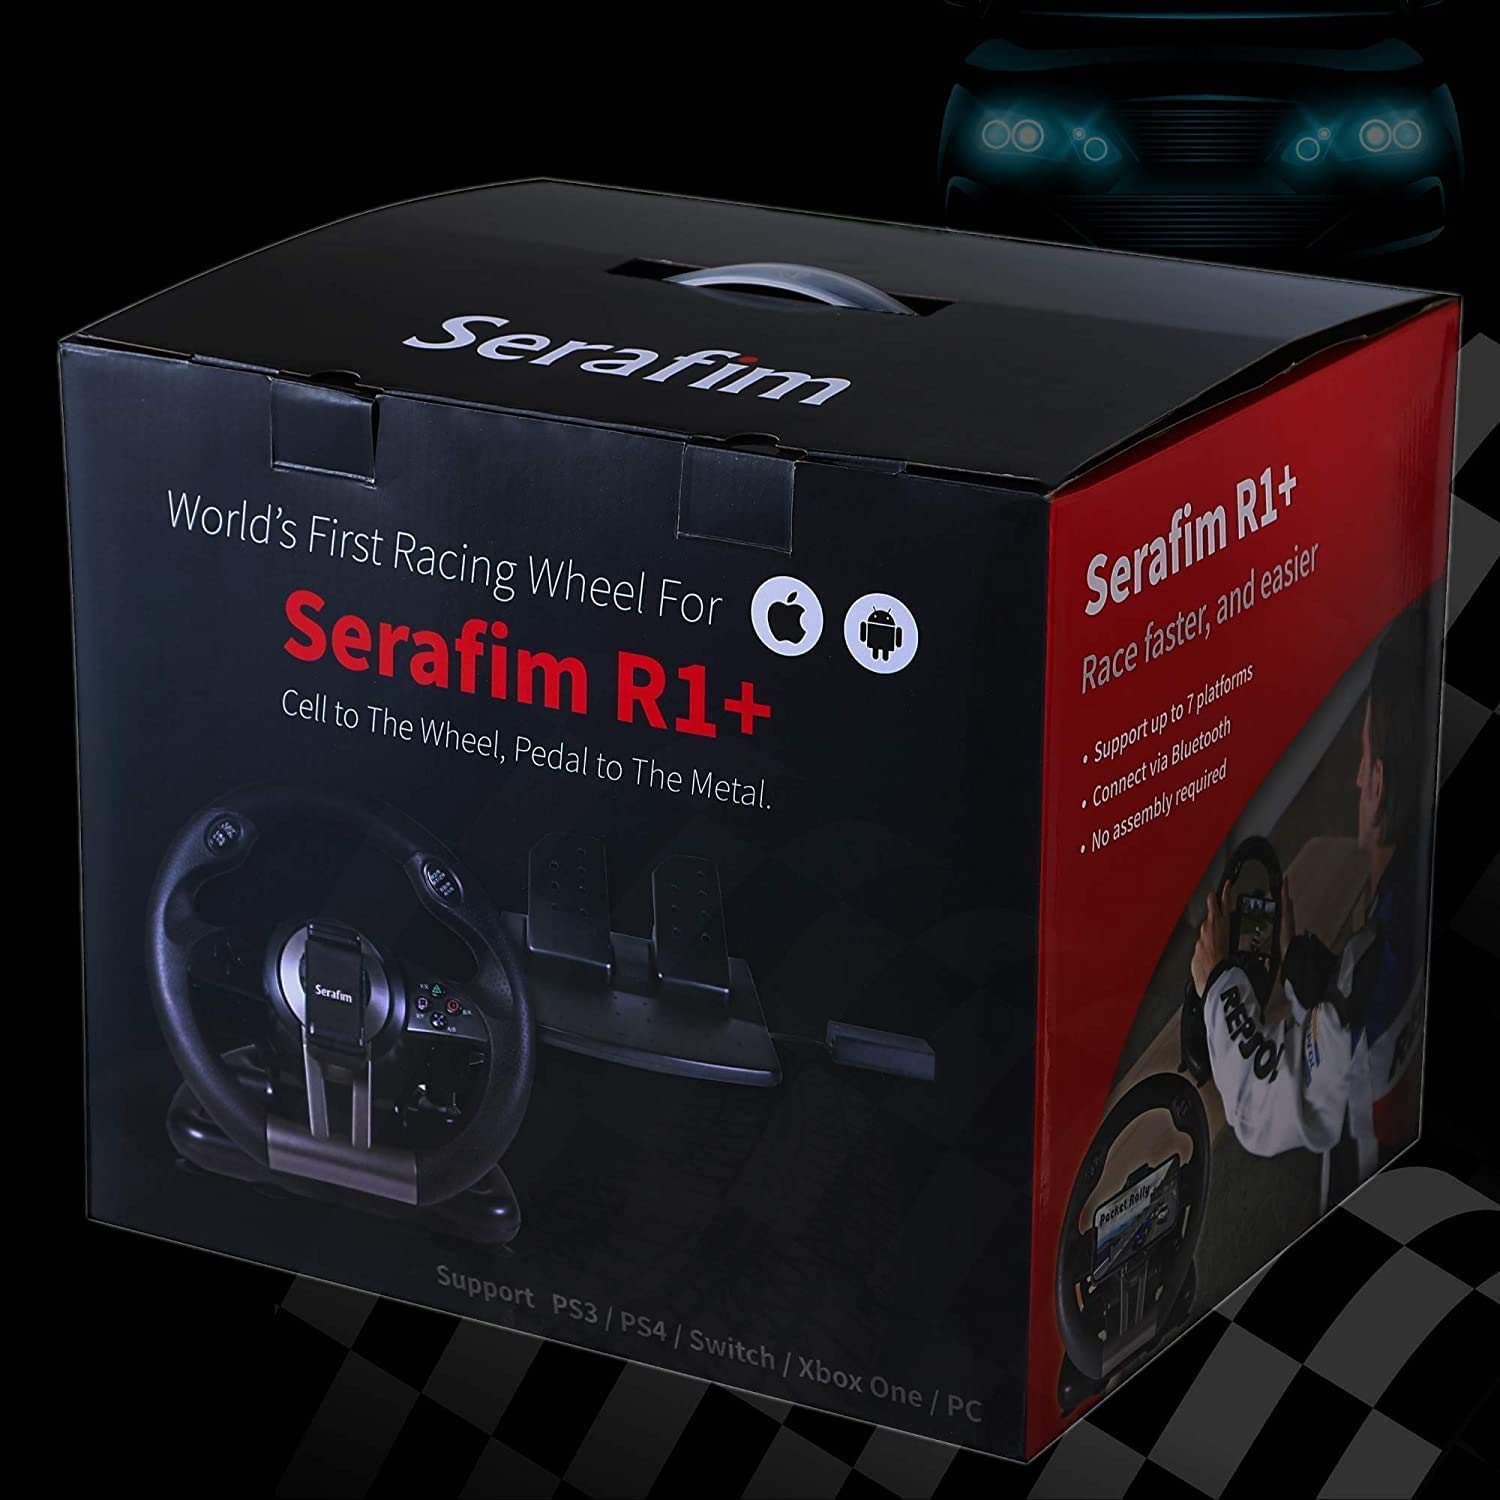 Serafim Gaming Wheel fully supports : XBOX ONE, XBOX Series X&S, PS4, PS3, Switch, PC, iOS, Android -PS4 Steering Wheel, PC Gaming Wheel